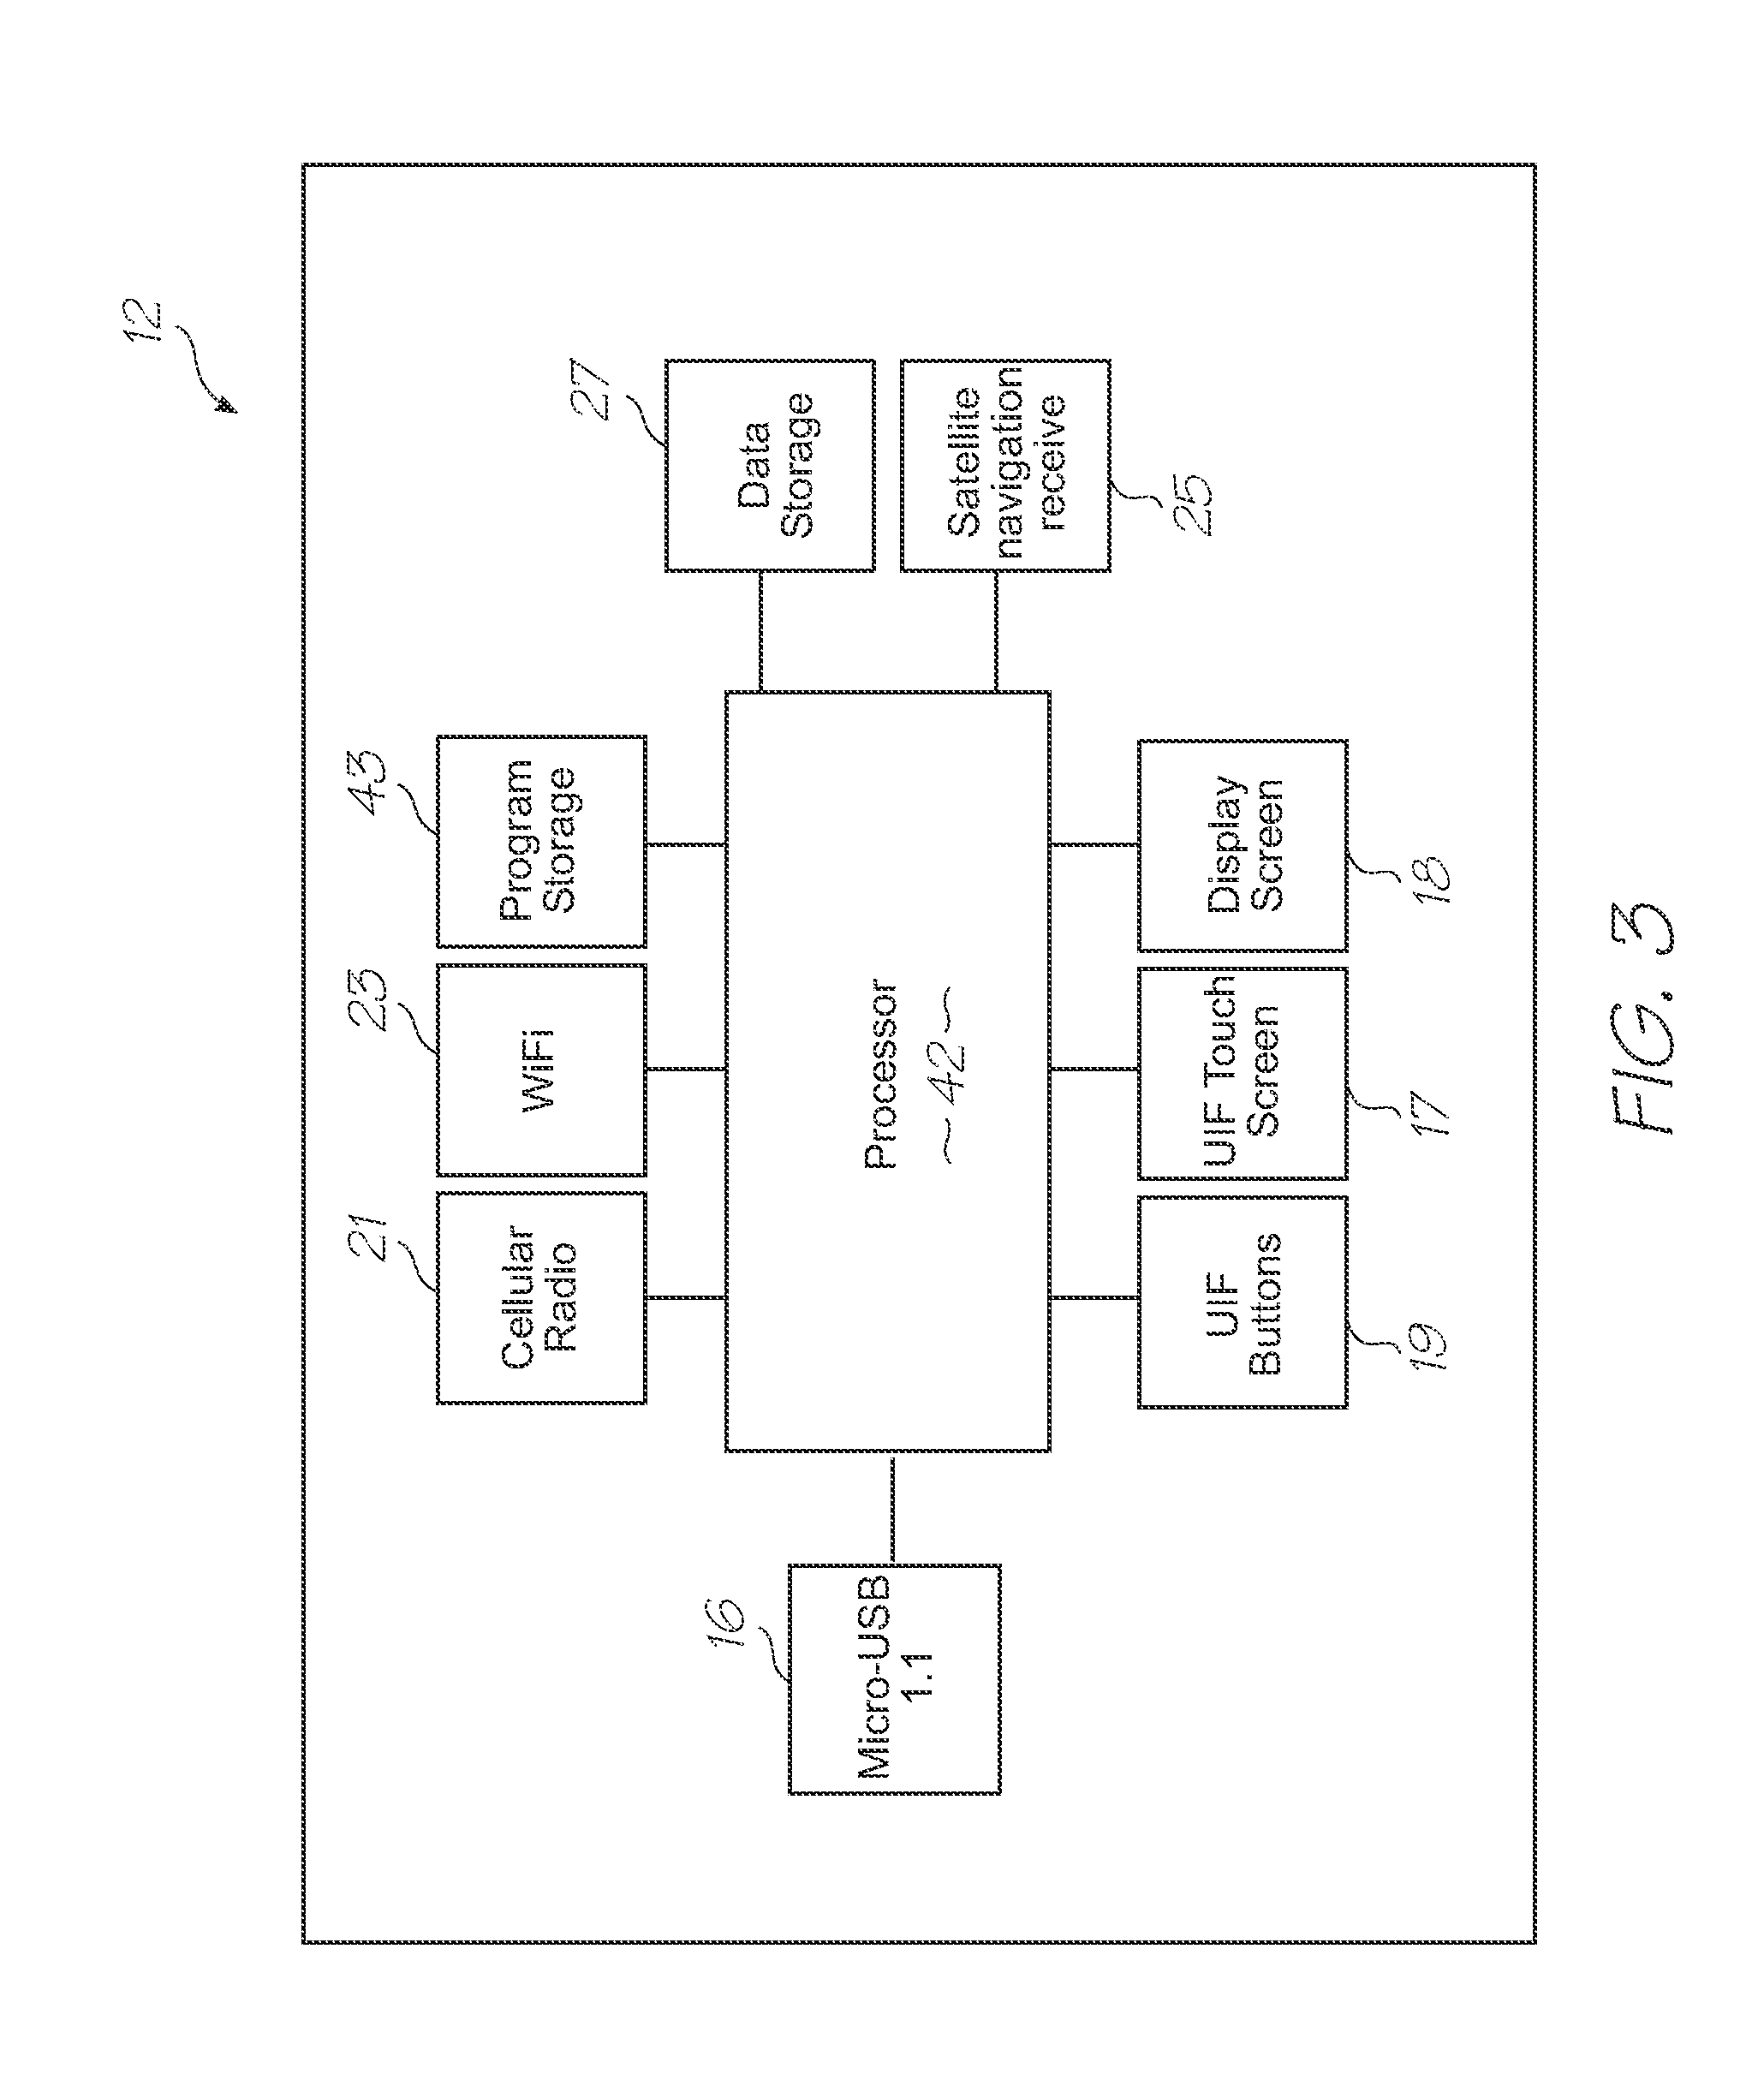 Microfluidic device with chemical lysis section